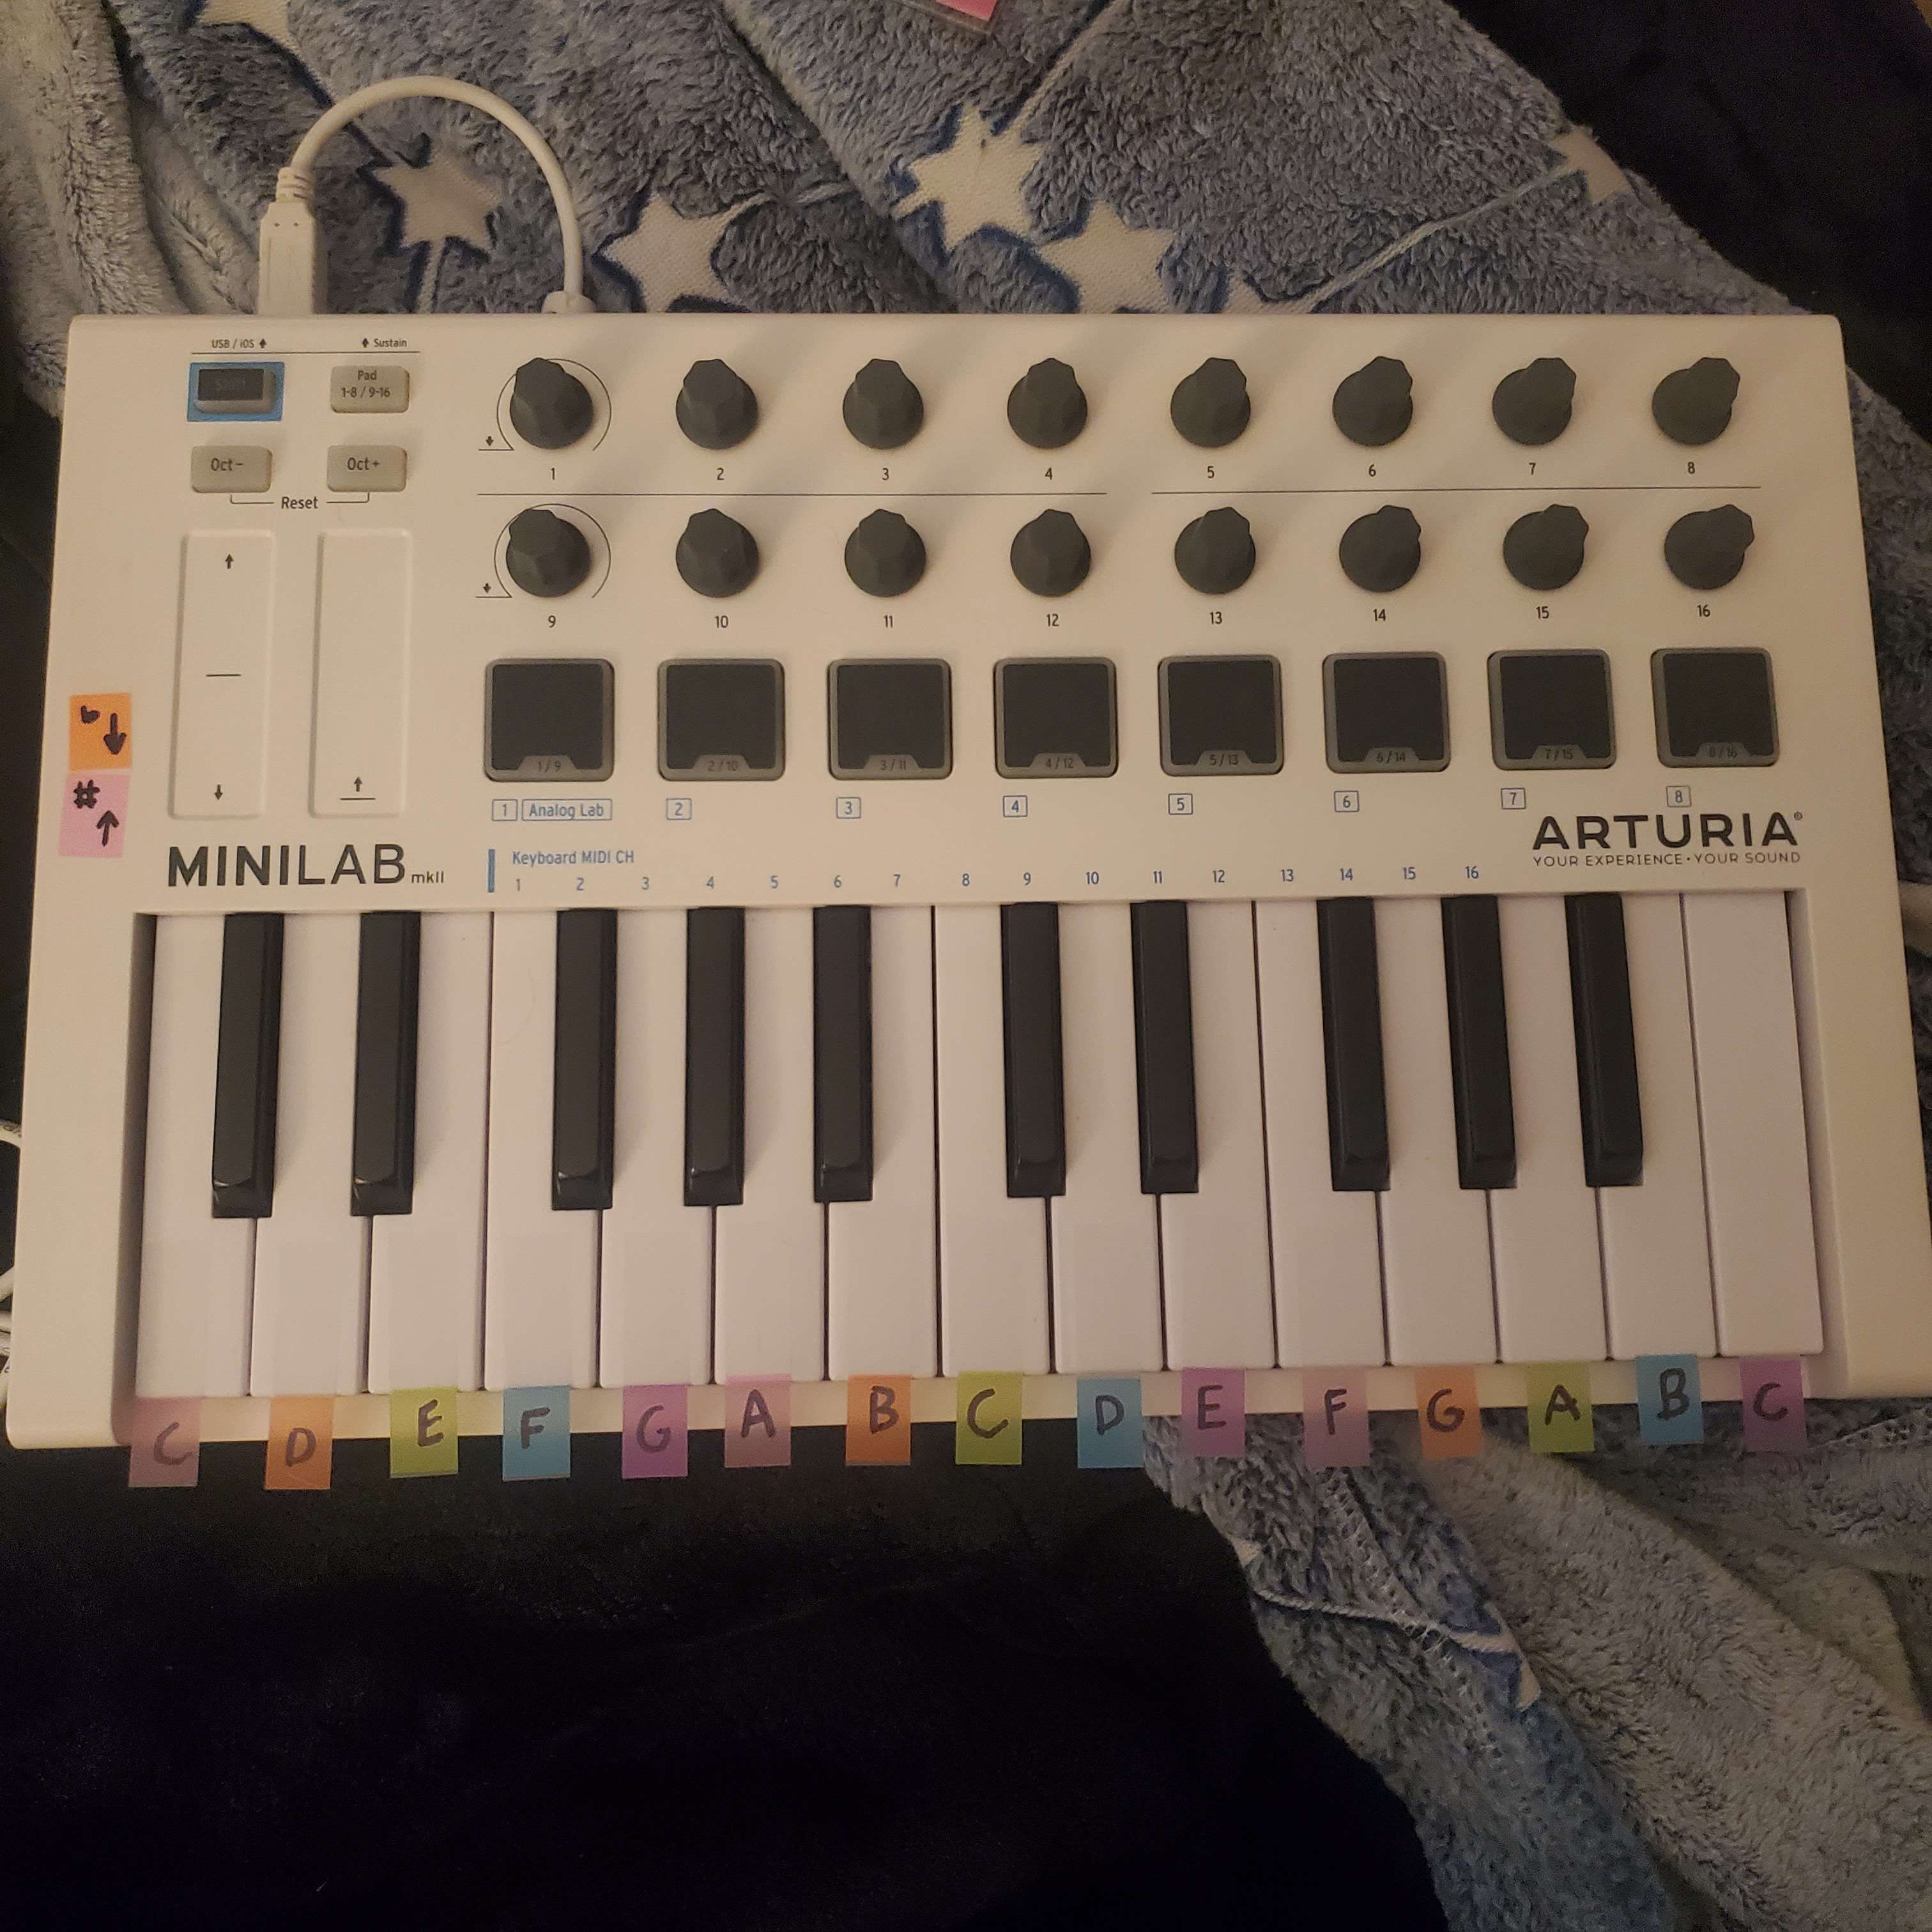 arturia minilab mark 2, with colored sticky note tabs on the keys